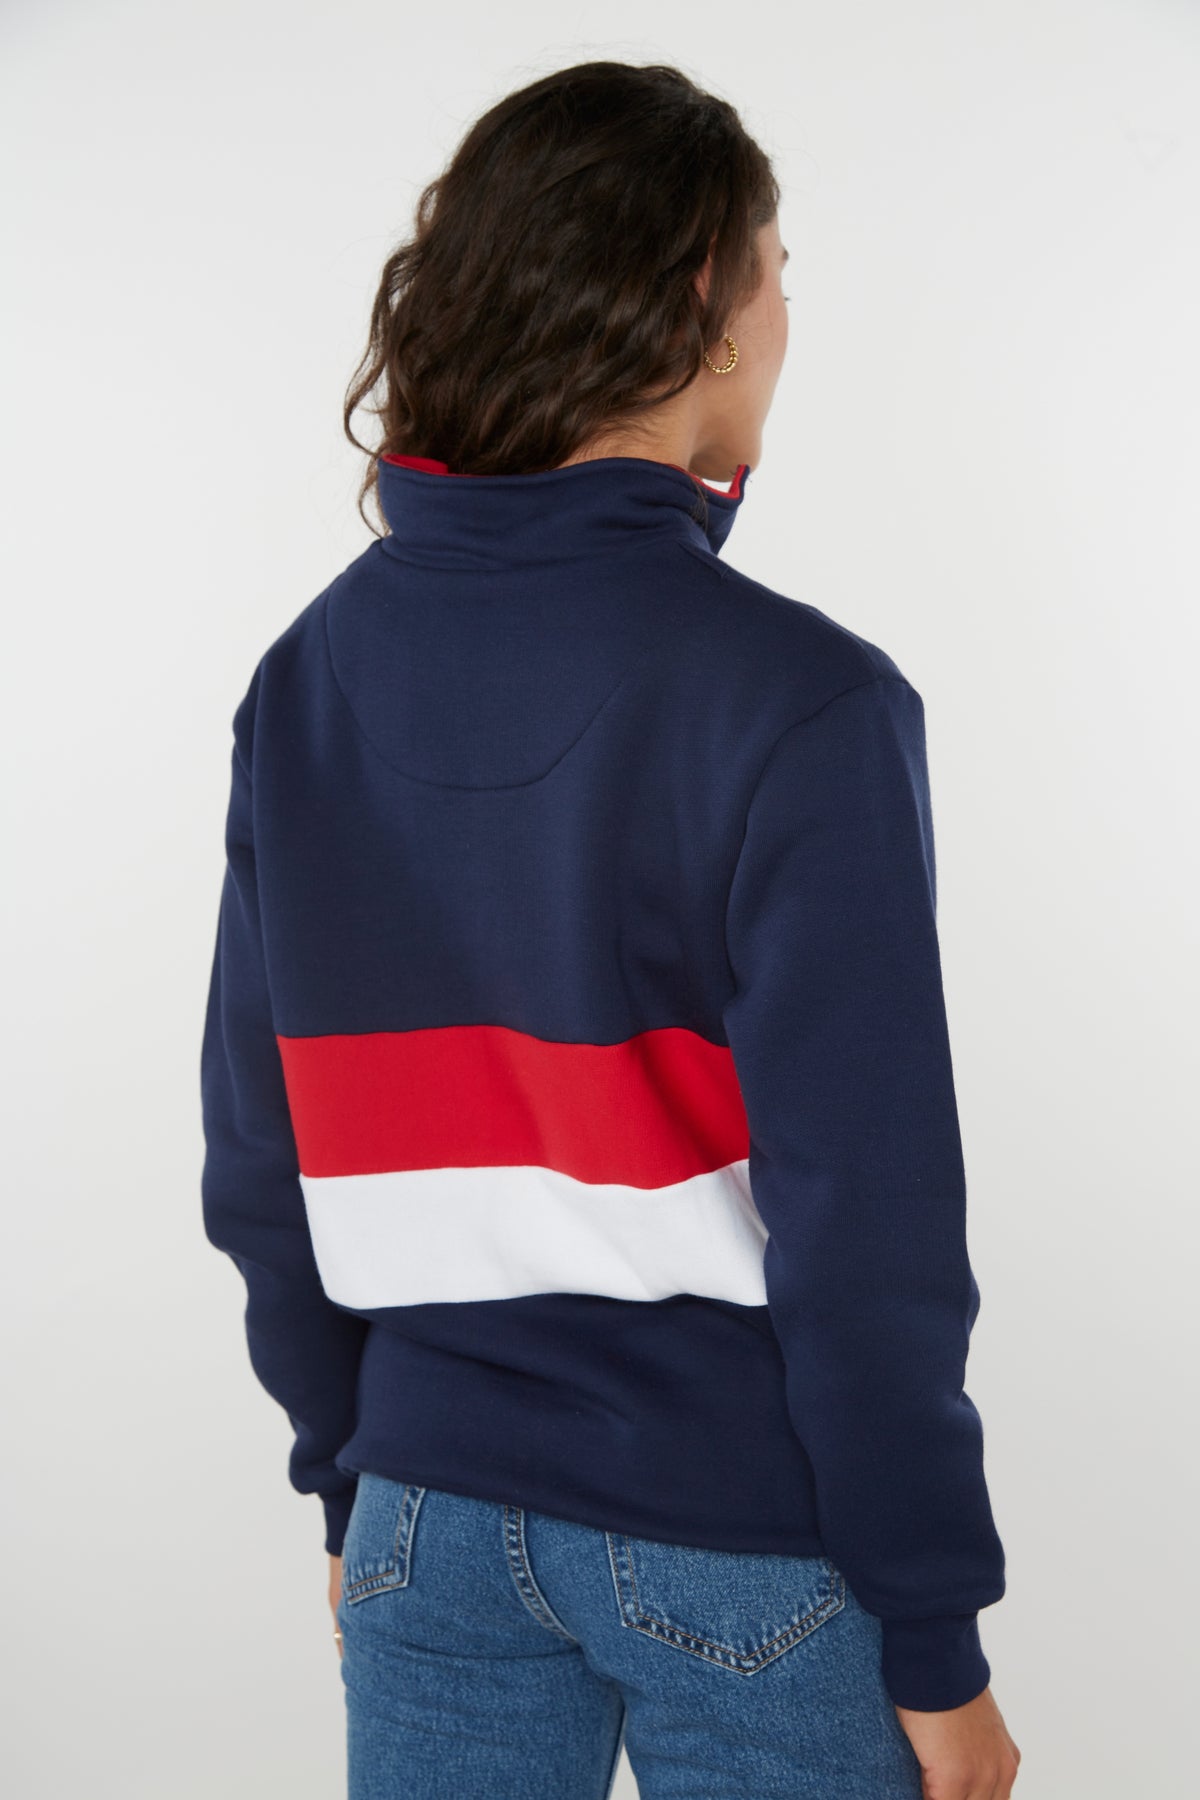 Suffolk Unisex Quarter Zip Sweatshirt - Navy - Whale Of A Time Clothing